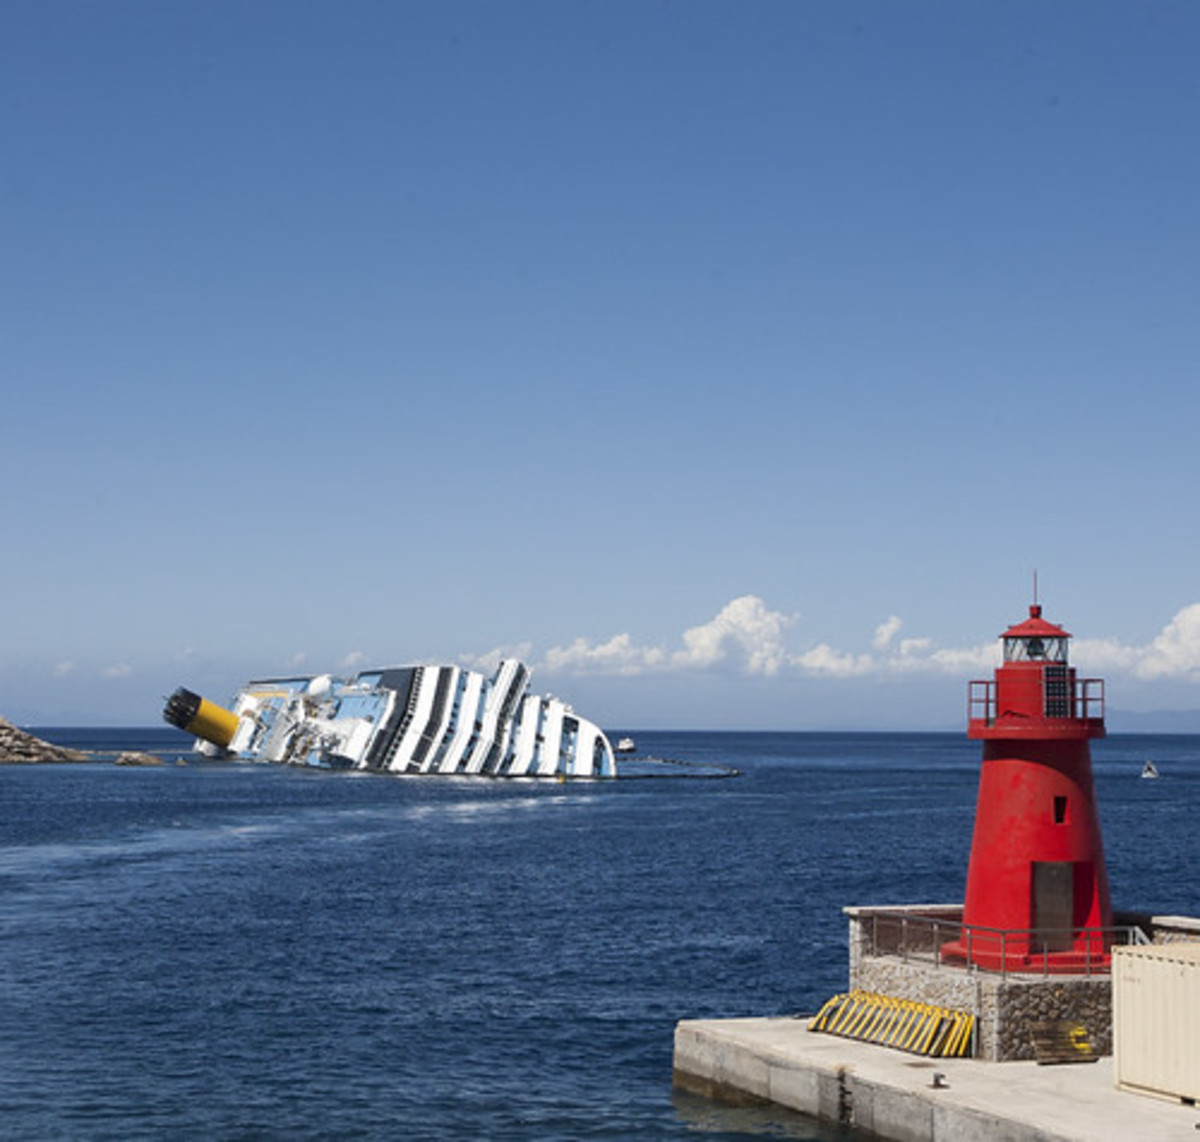 Thirty-two people died on the half-submerged Costa Concordia. Her captain, Francesco Schettino, received a 16-year prison sentence.